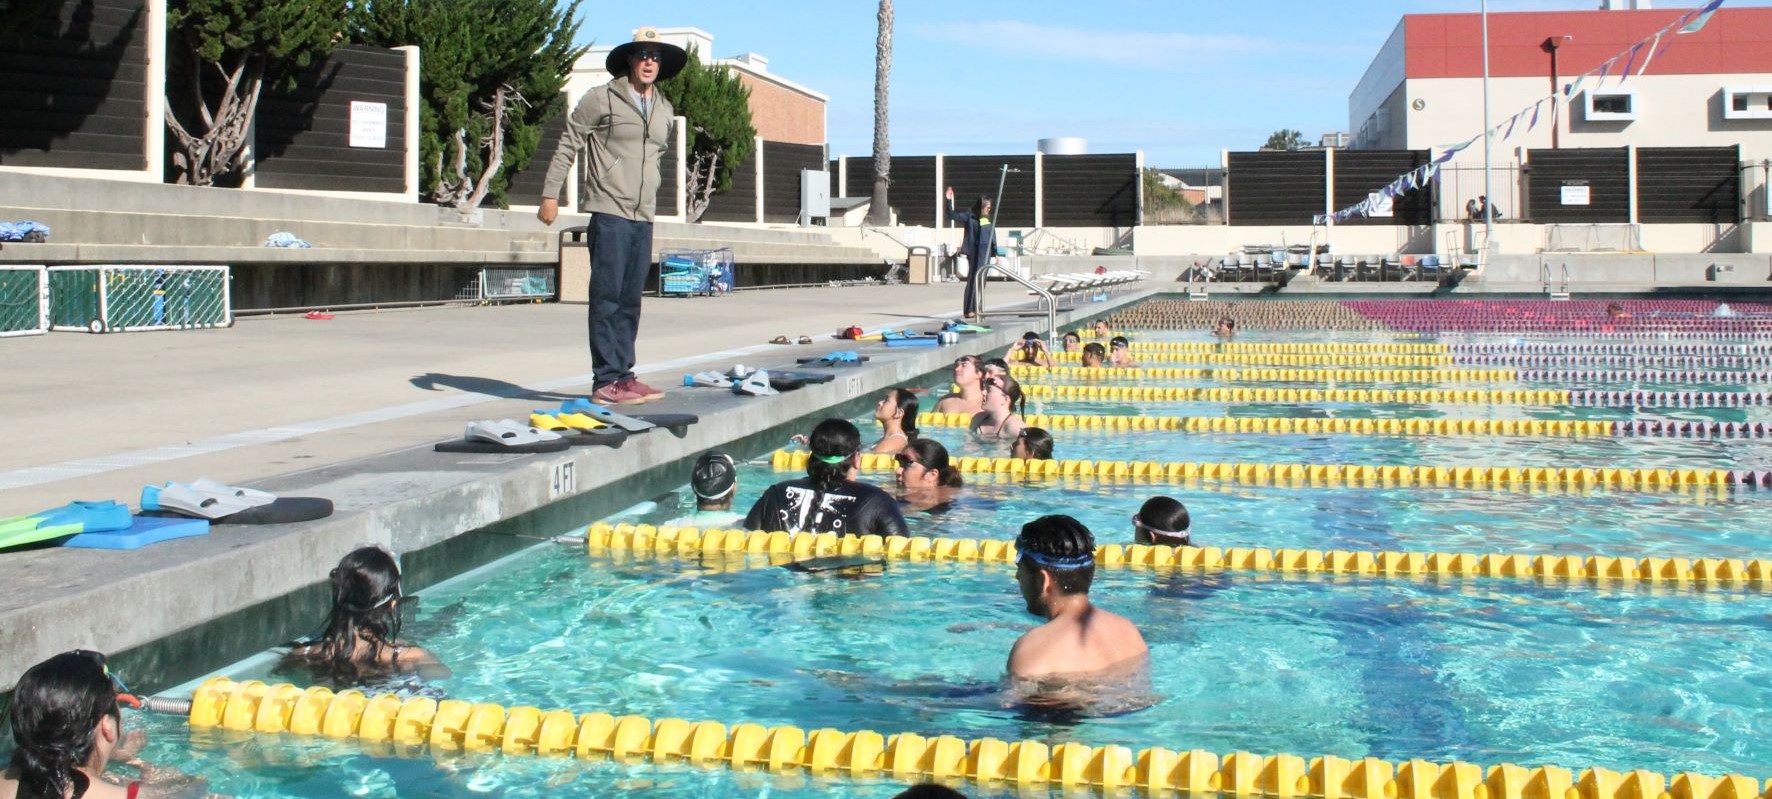 Instructor directs students in swimming pool.